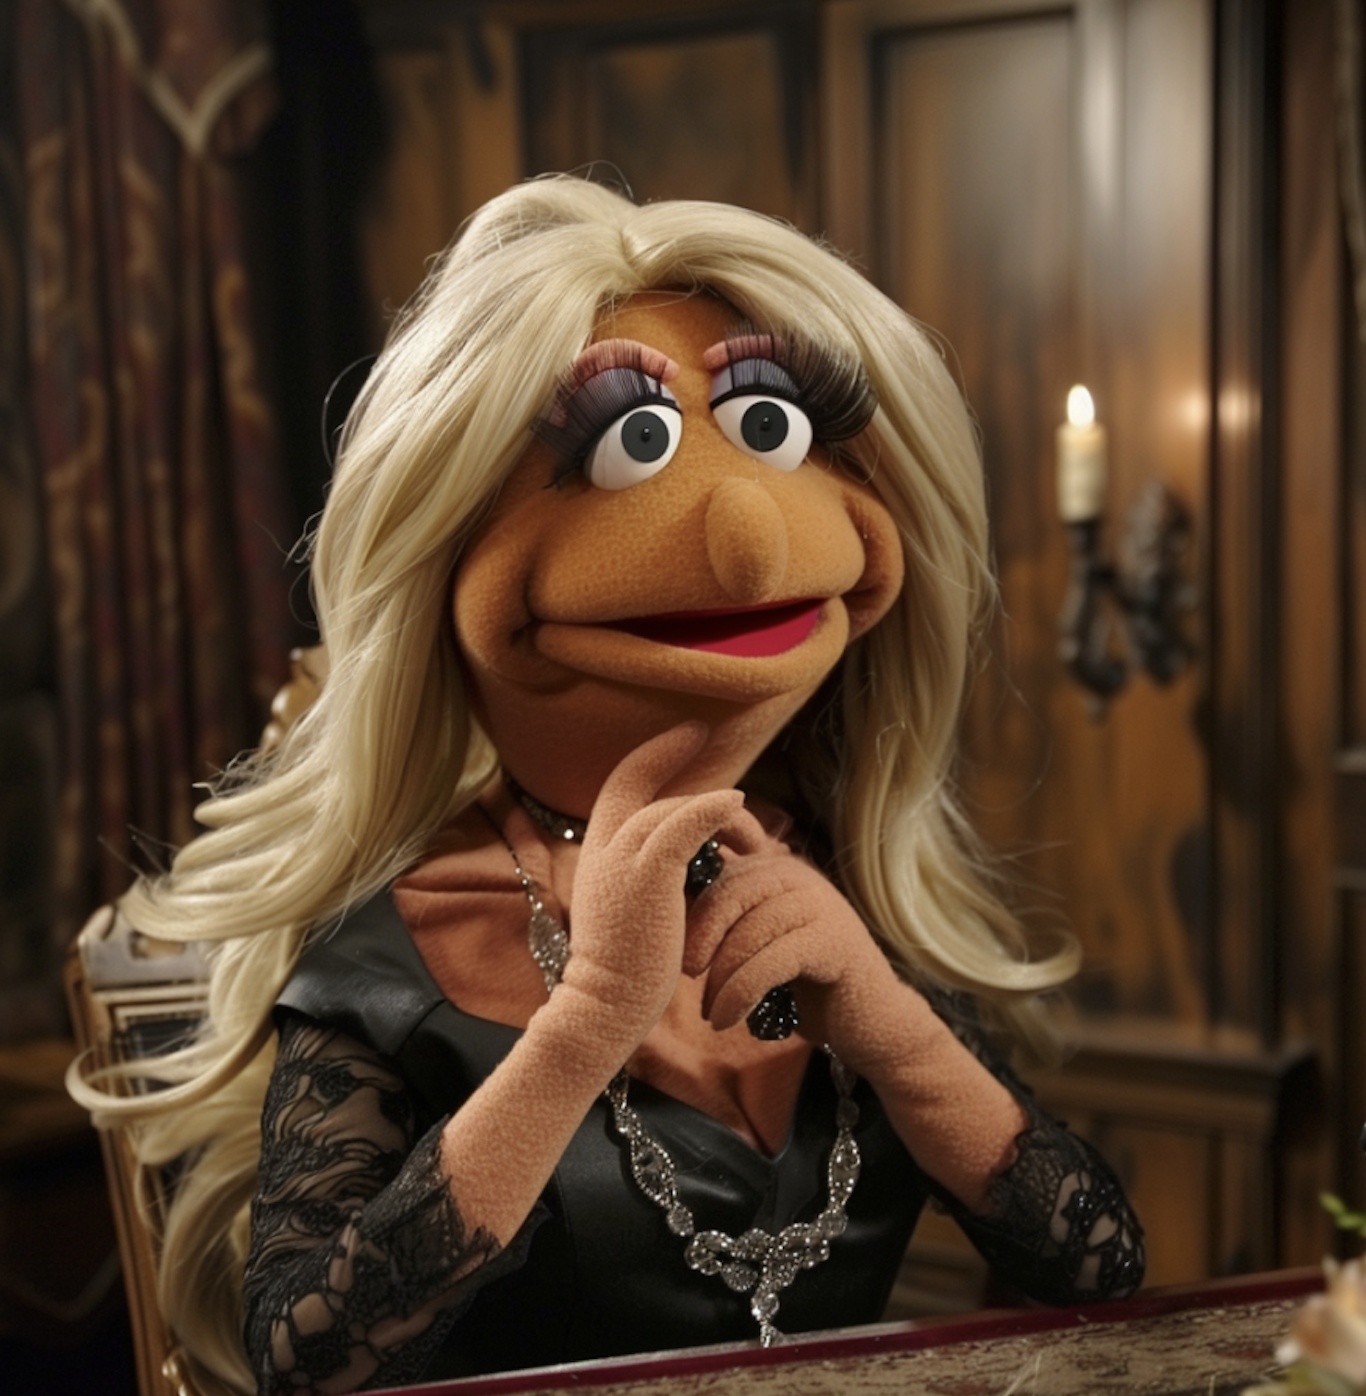 Muppet with long blonde hair in elegant attire with necklace, sitting indoors